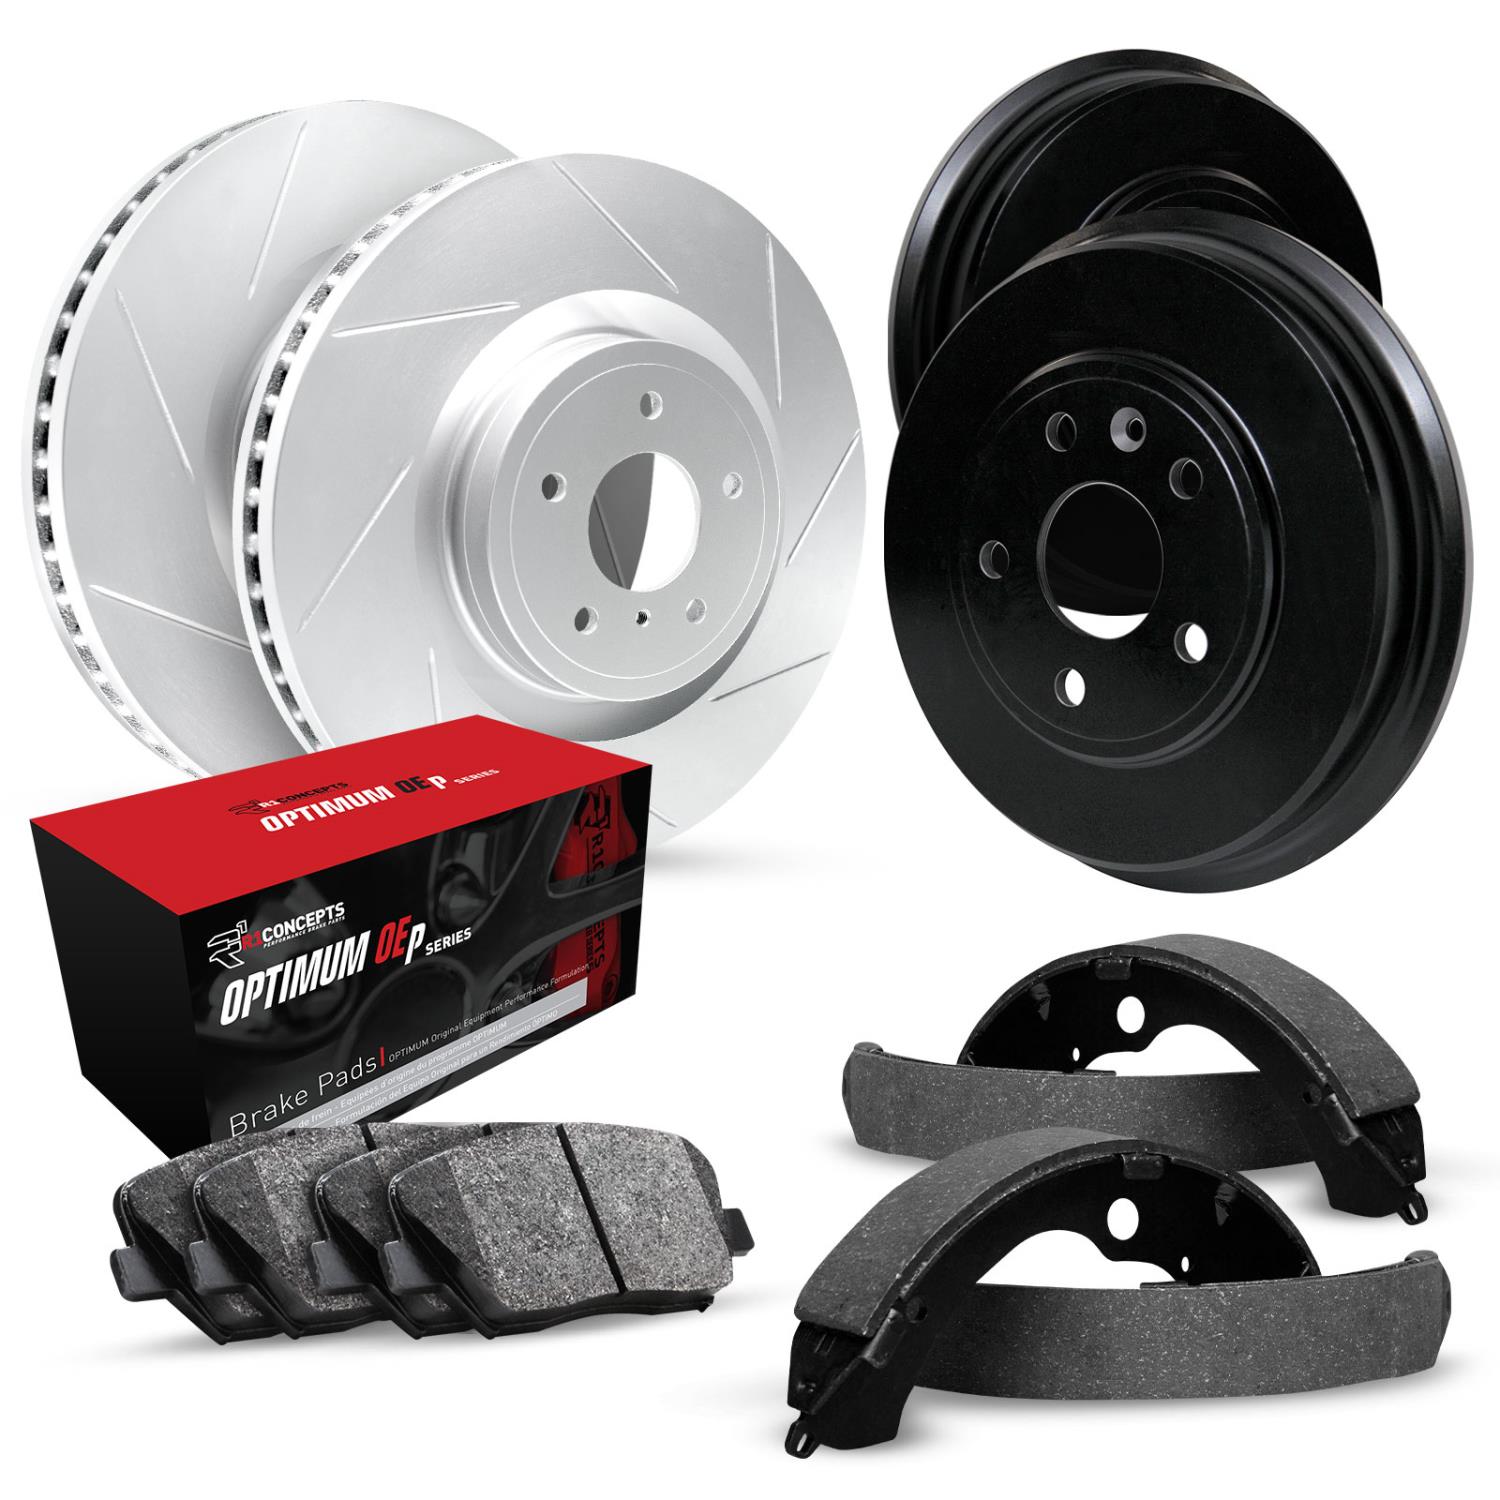 GEO-Carbon Slotted Brake Rotor & Drum Set w/Optimum OE Pads & Shoes, 1988-1991 Acura/Honda, Position: Front & Rear